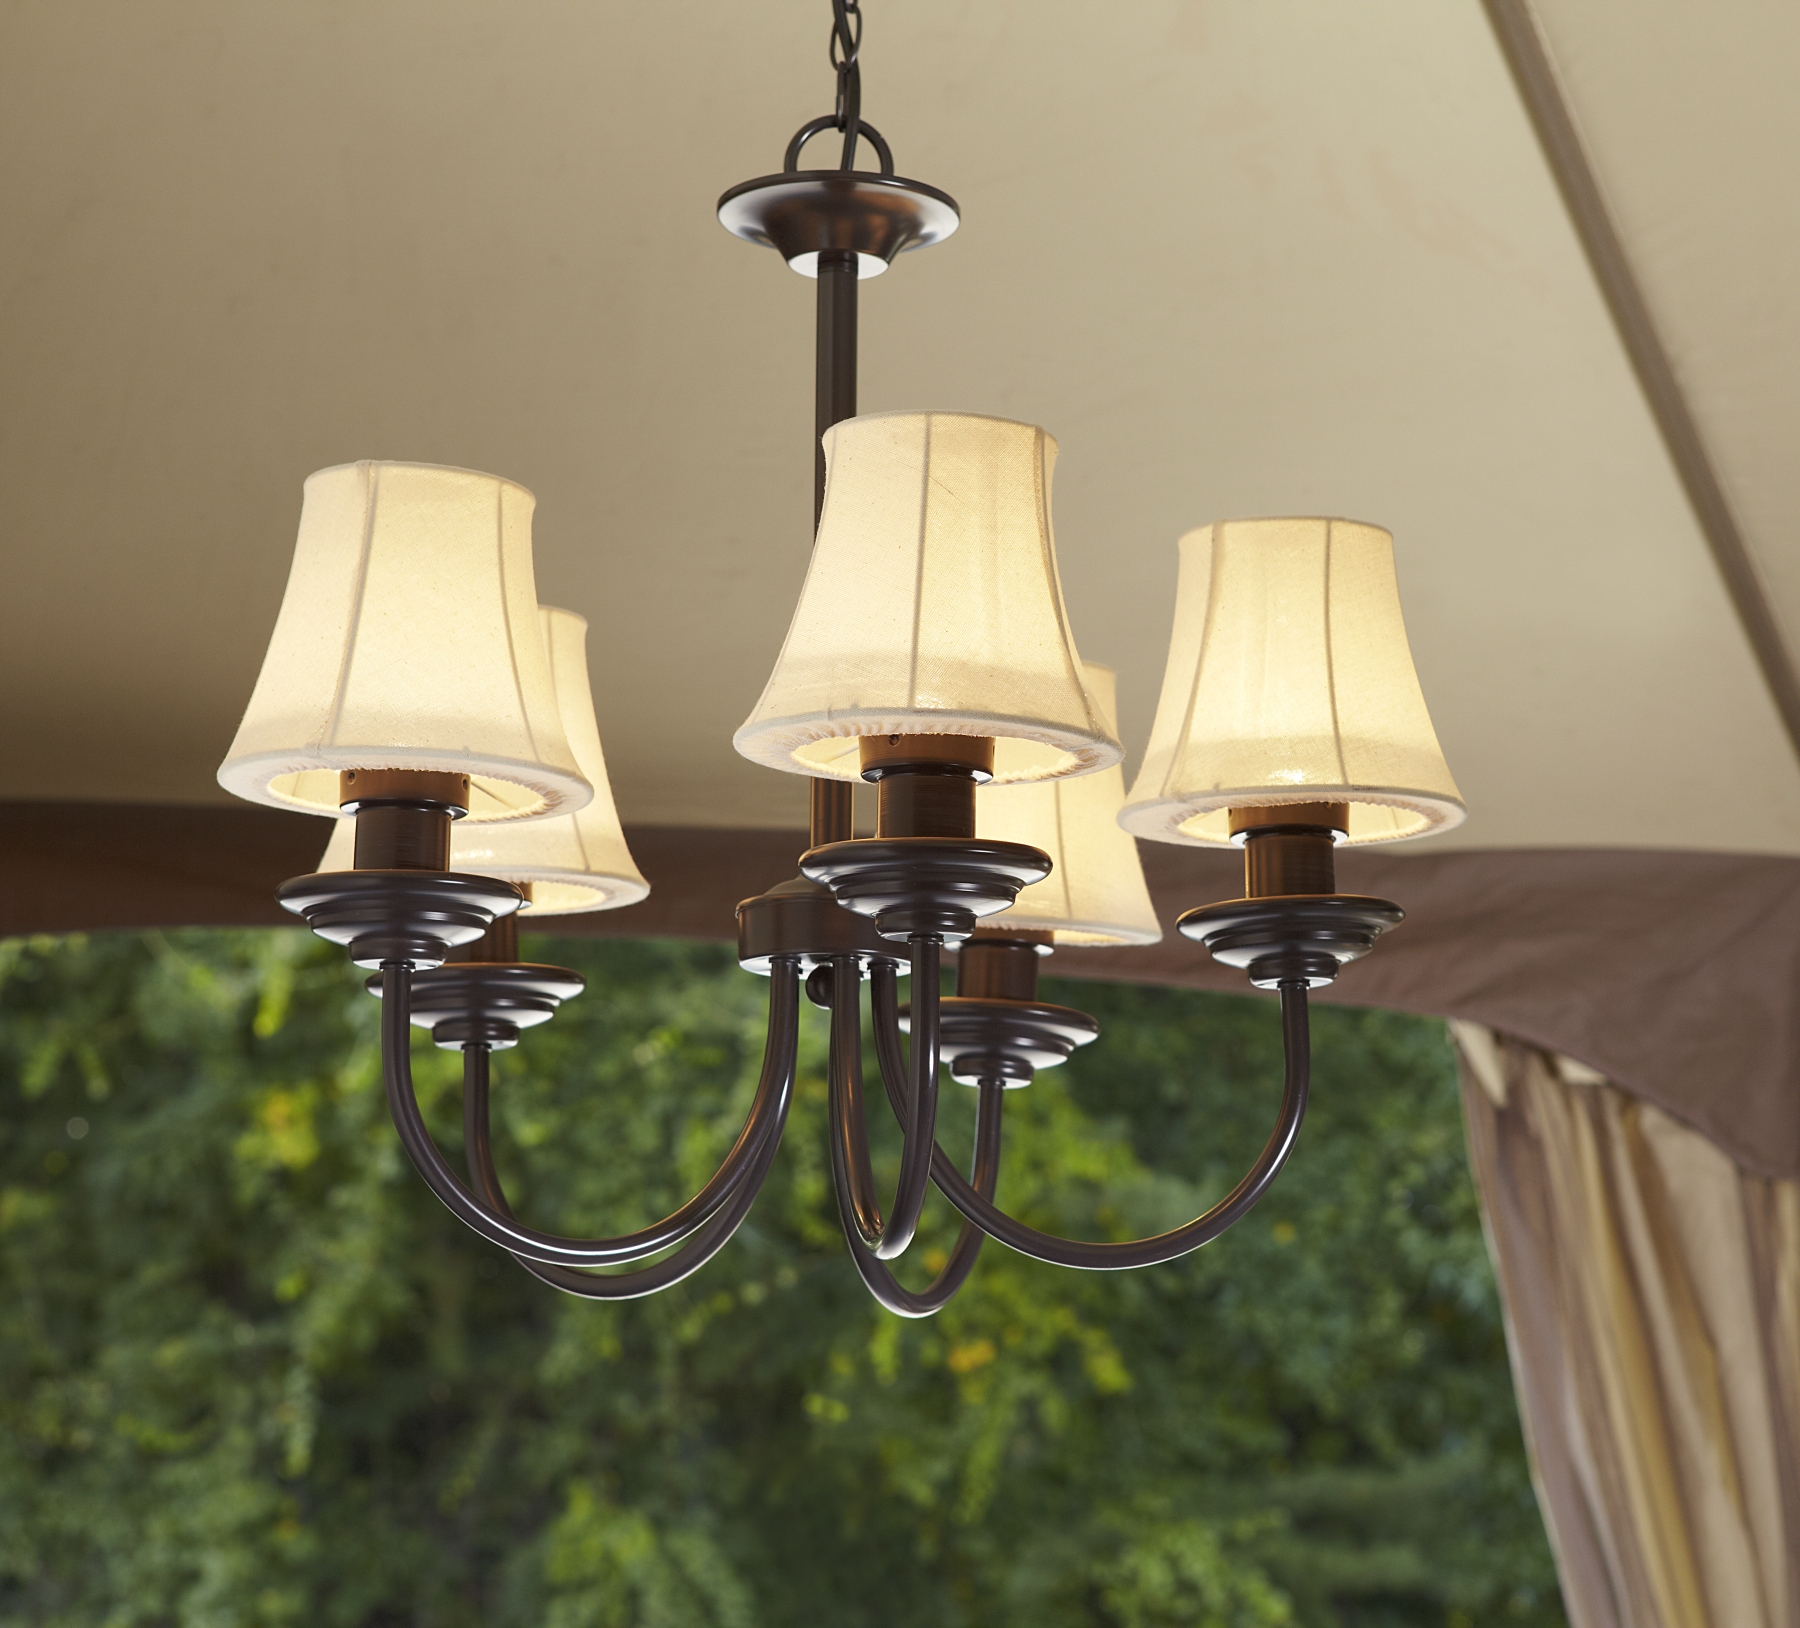 Outdoor Electric Chandelier Classic Outdoor Living with Sears